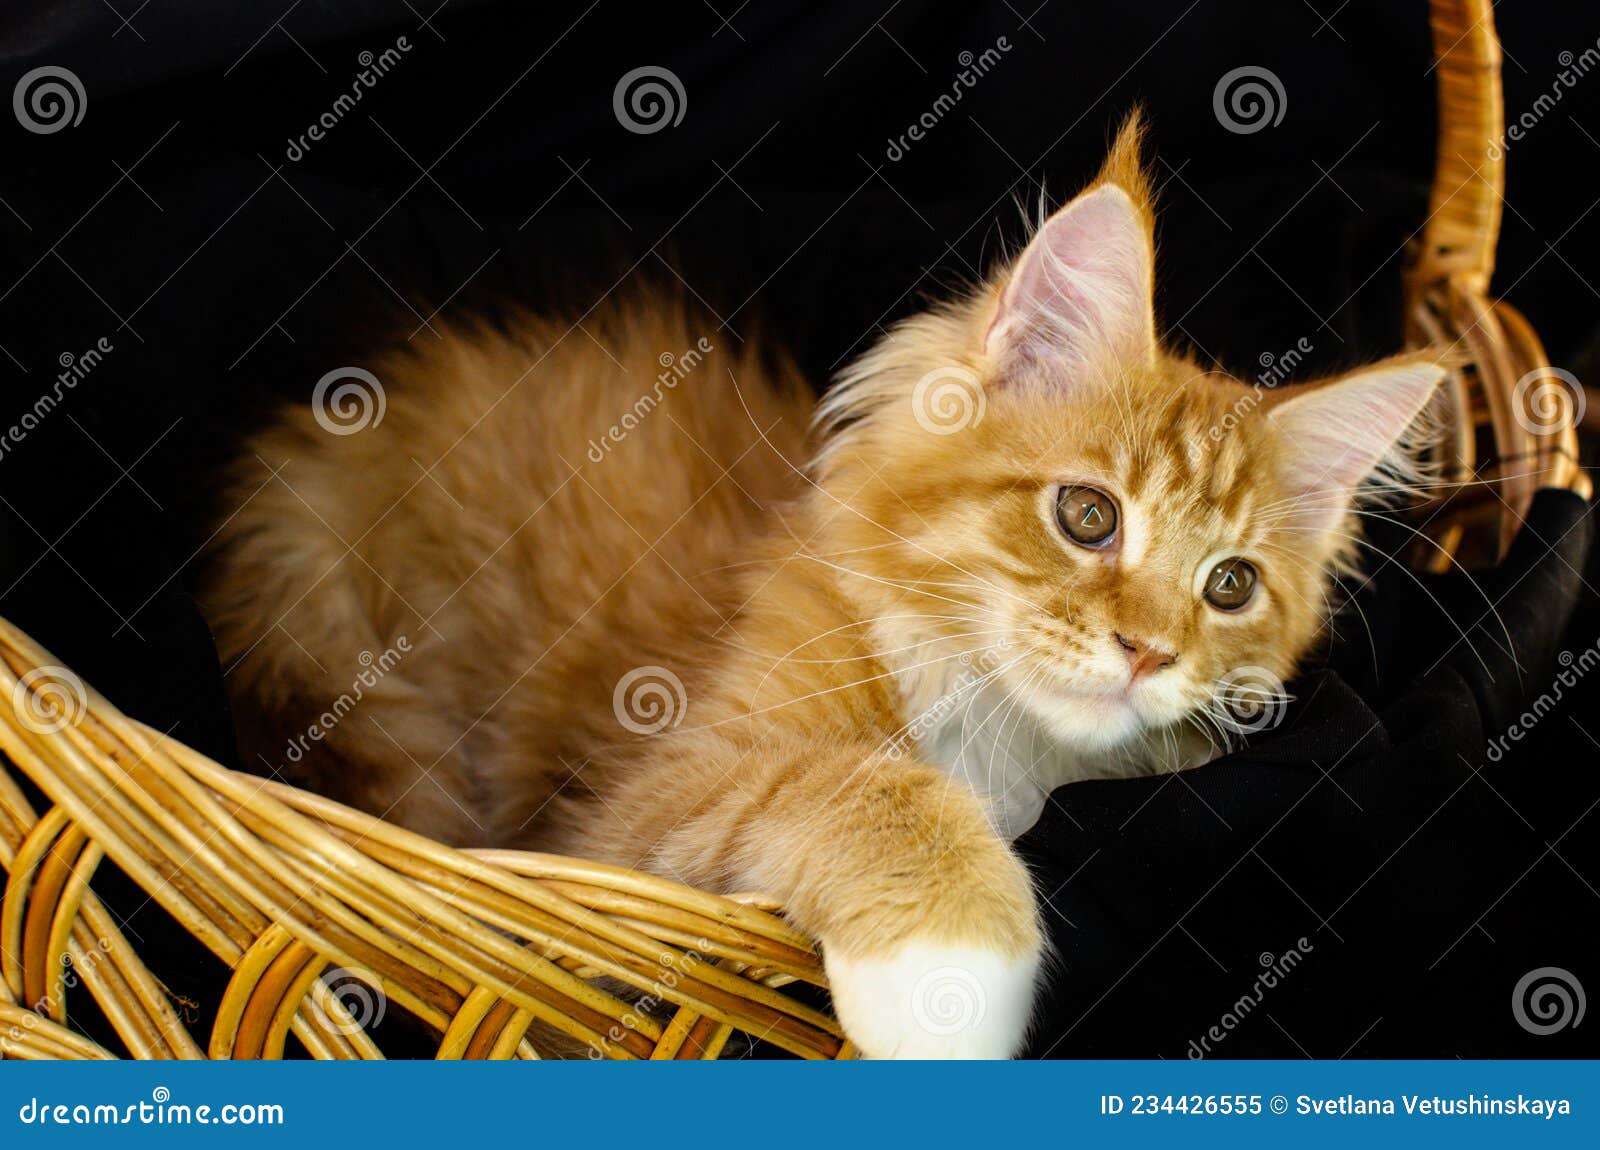 Maine Coon Cat Color, with Fluffy Red Hair, on a Black Background. Maine Coon Kitten Who is 2 Months Old Stock Image - Image of front, 234426555